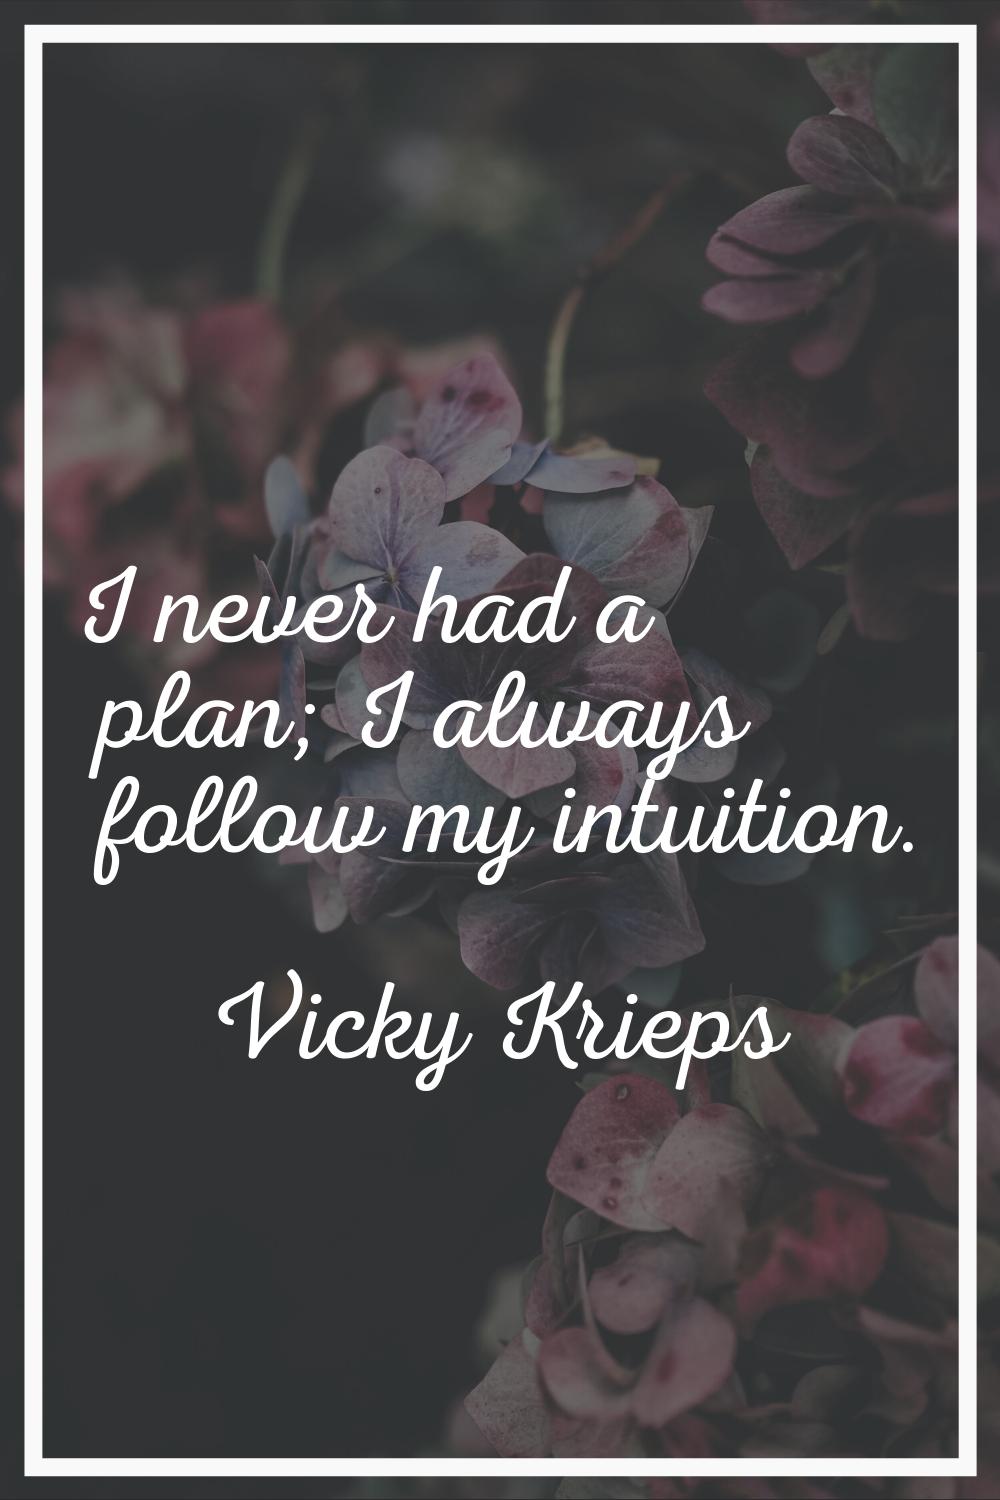 I never had a plan; I always follow my intuition.